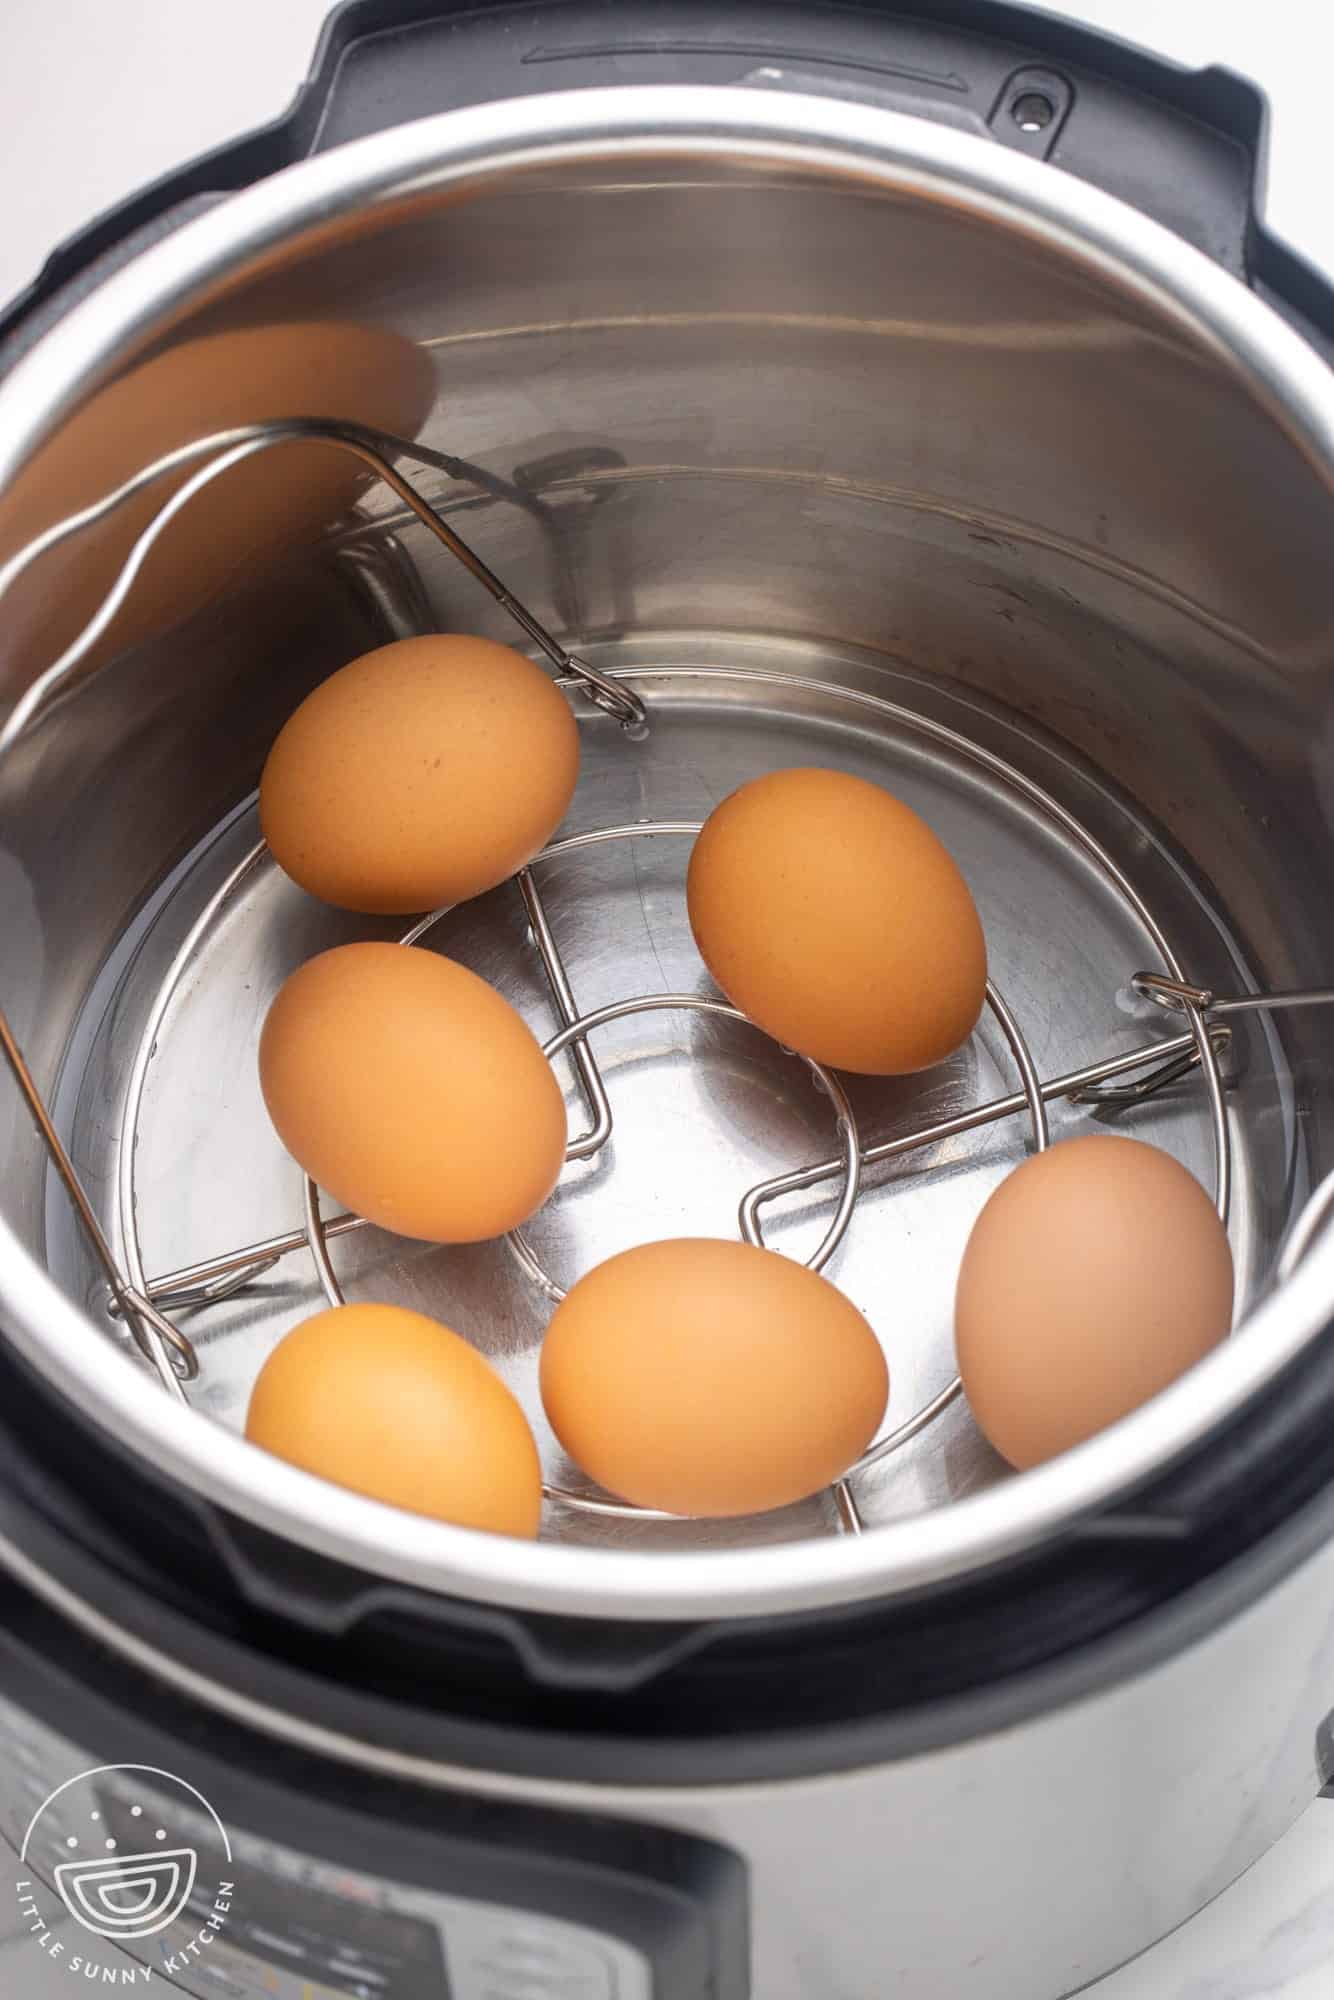 Six brown eggs in the instant pot placed on a trivet